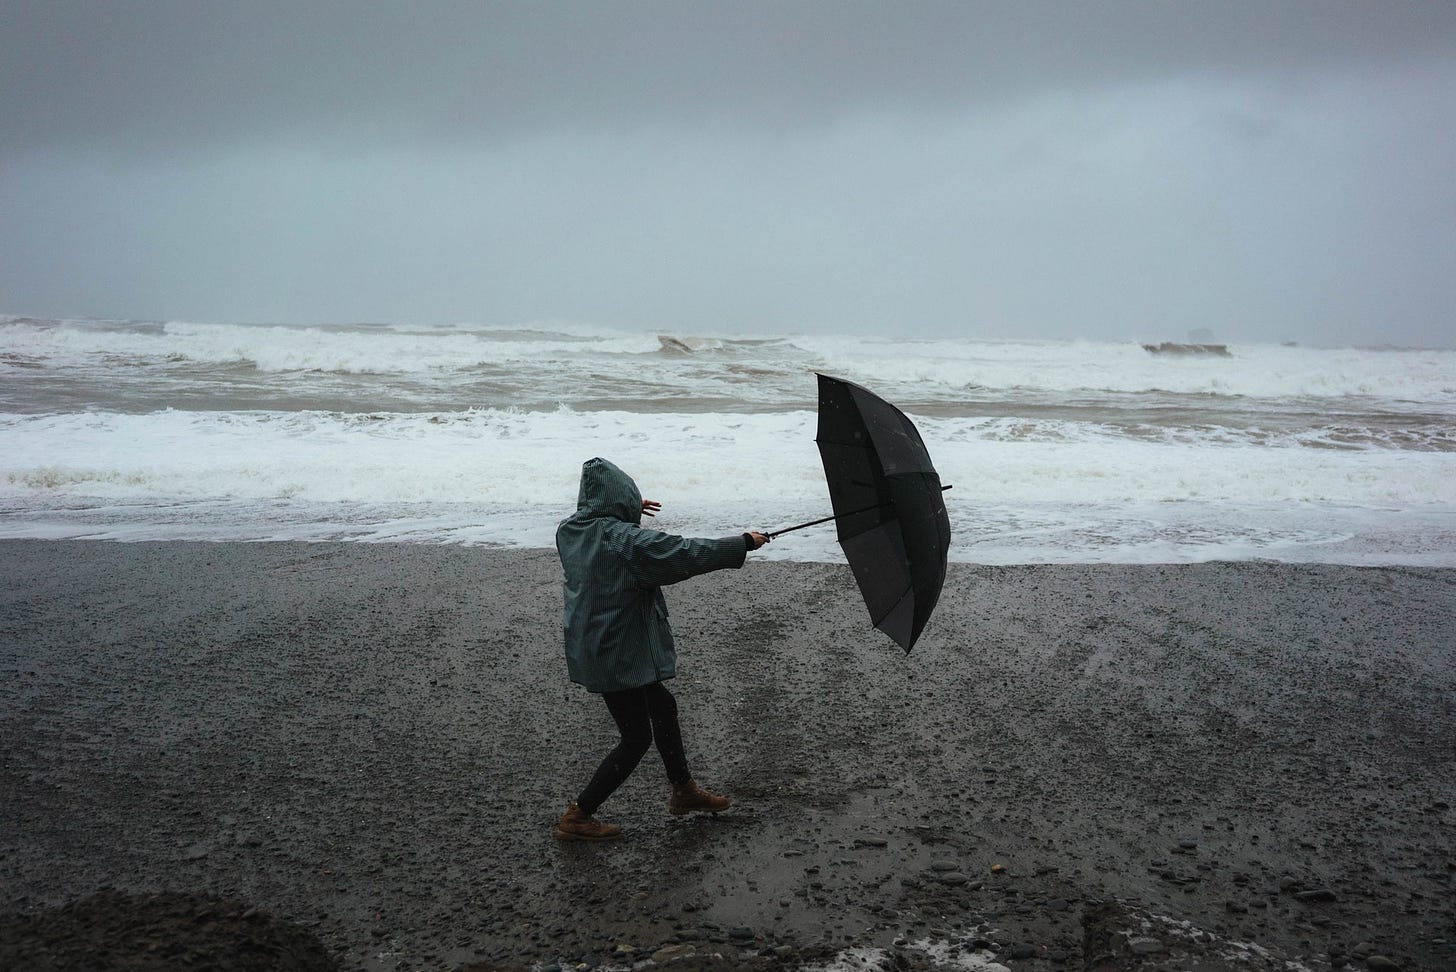 Person in dark green rain coat on a beach near the water. It's a dark, stormy situation, and the person is holding an umbrella which they are trying to hold against the wind, which is pulling them to the right.